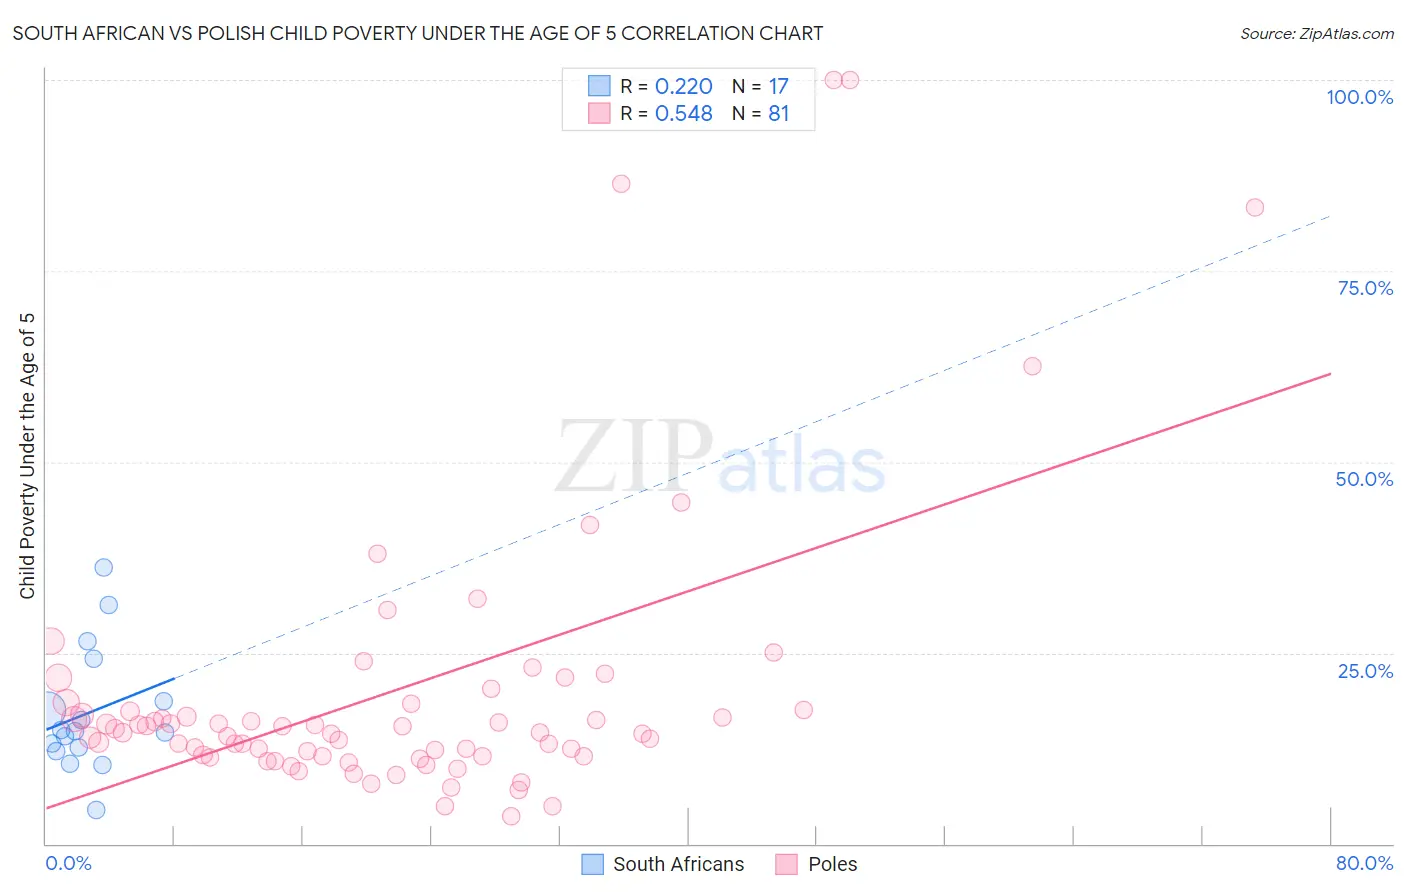 South African vs Polish Child Poverty Under the Age of 5